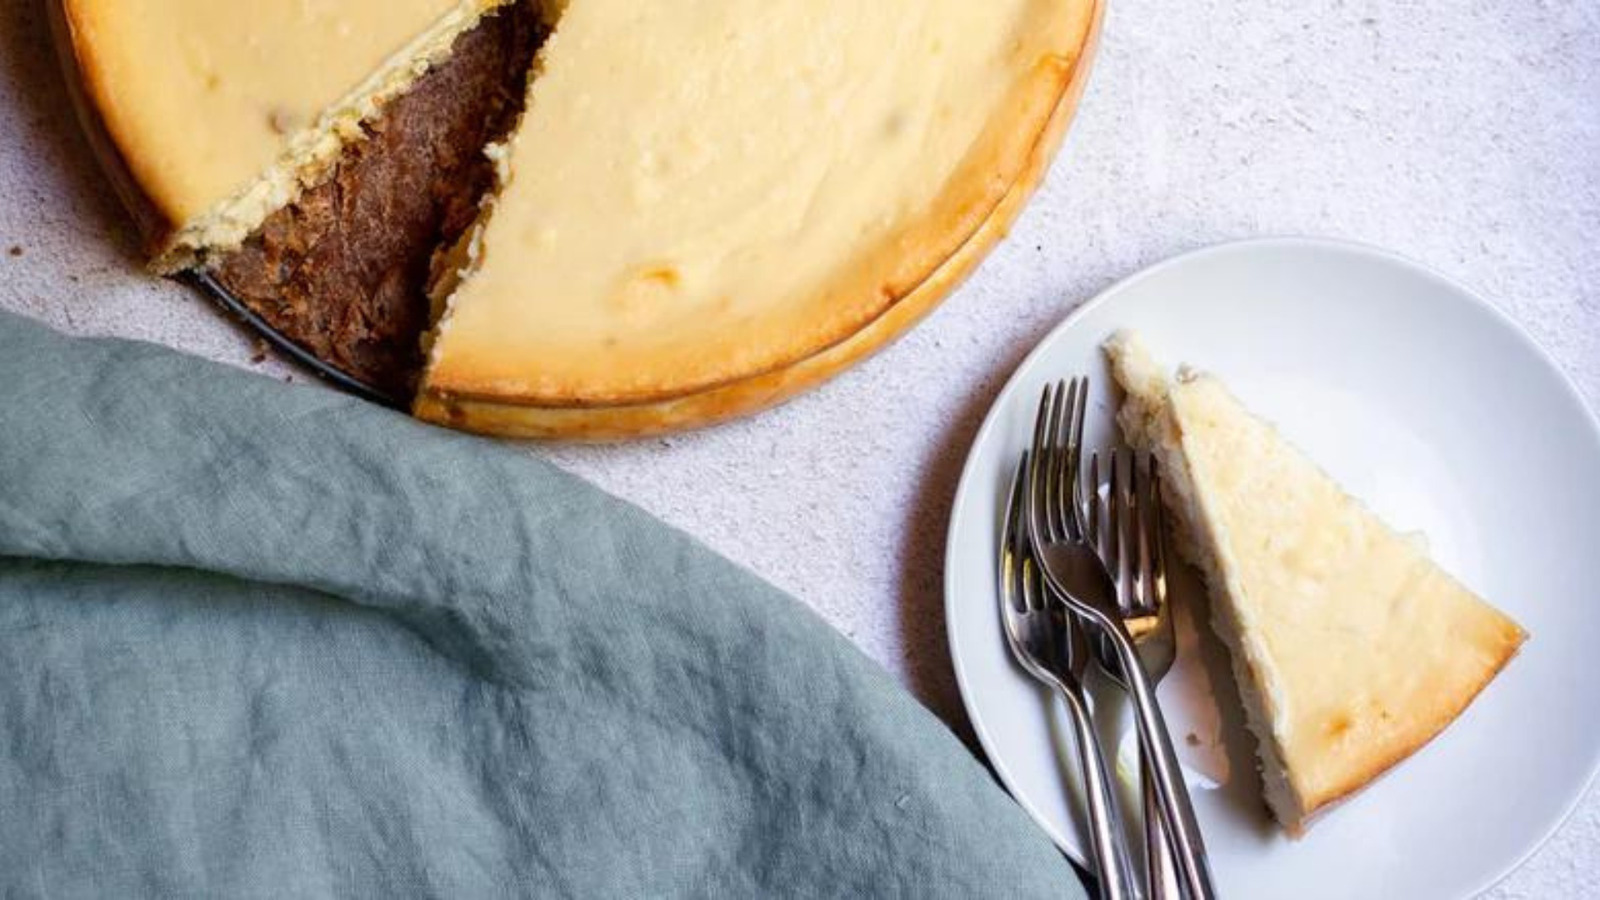 https://www.tastingtable.com/img/gallery/18-delicious-cheesecake-recipes-to-bake-this-fall/l-intro-1699286940.jpg